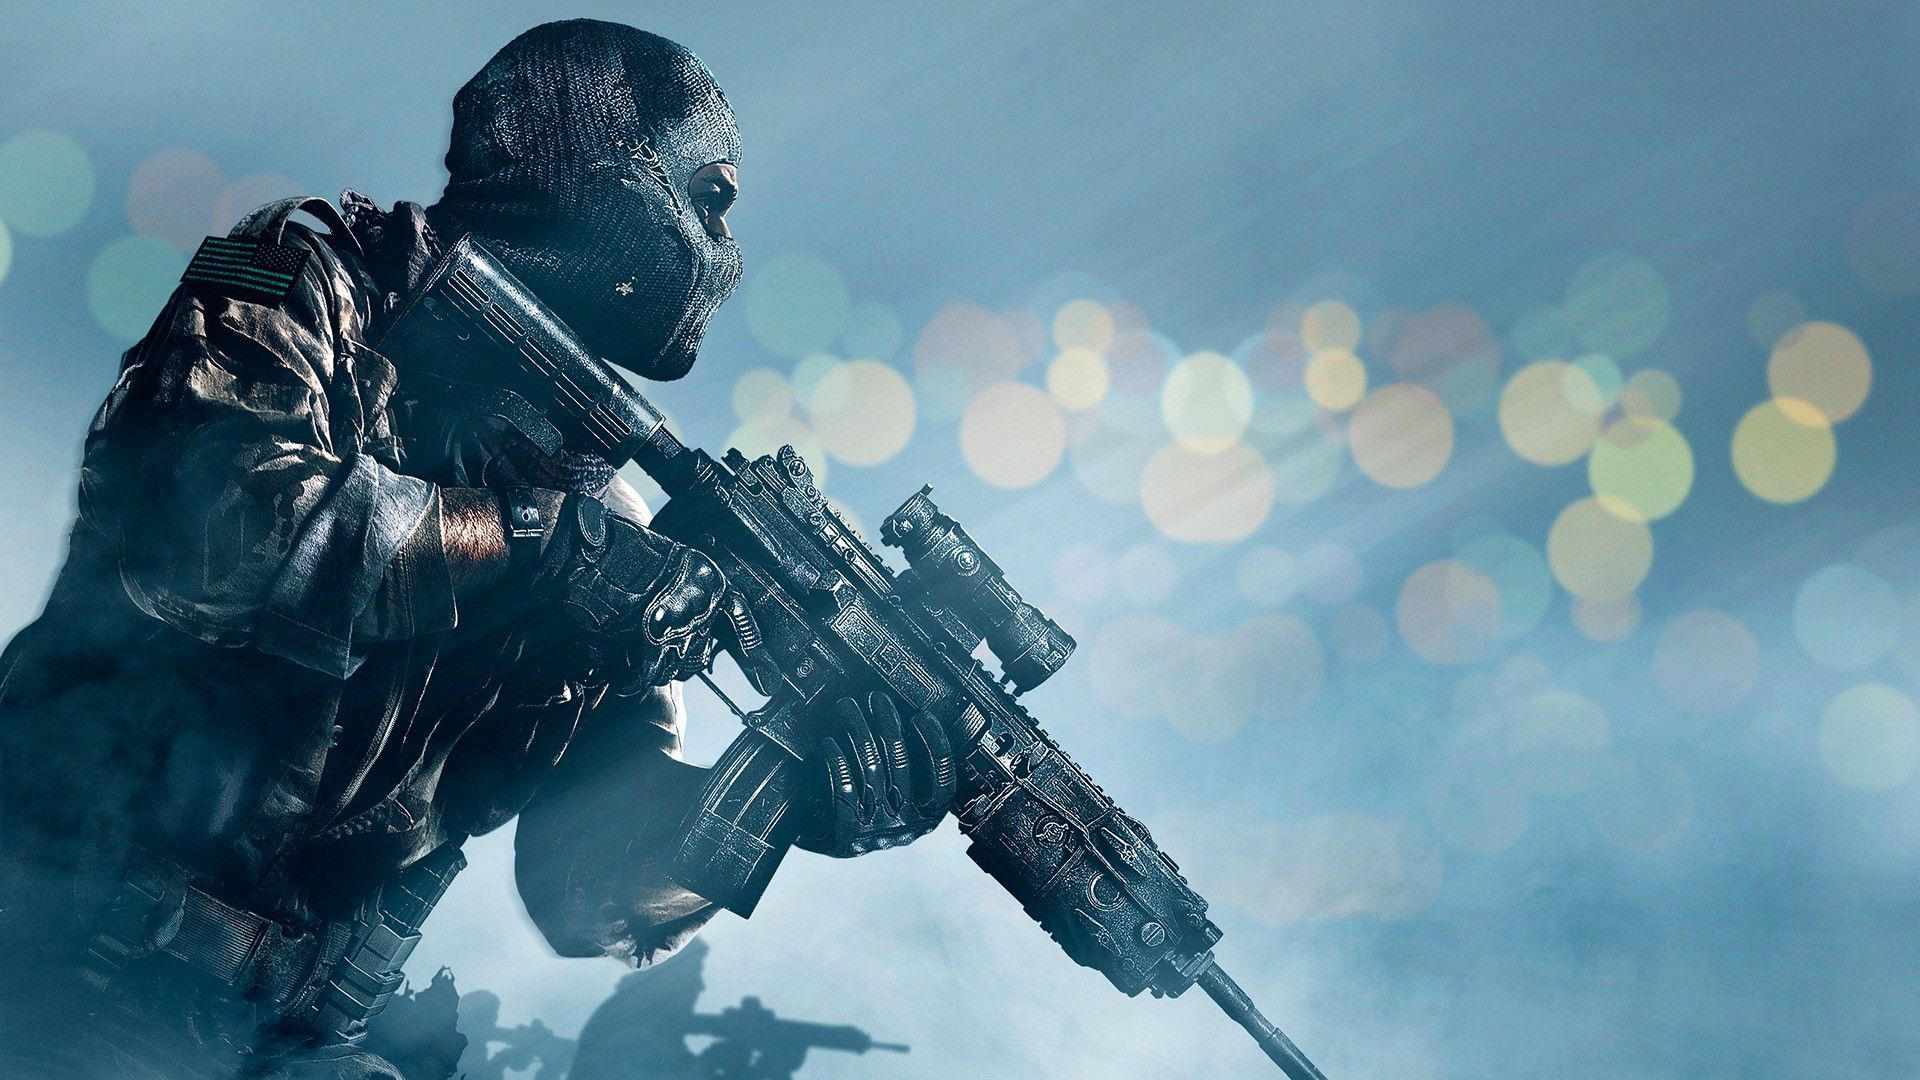 1920x1080 Call of duty ghosts, Activision, Infinity ward, Soldier, Gun, Mask, Military wallpaper JPG